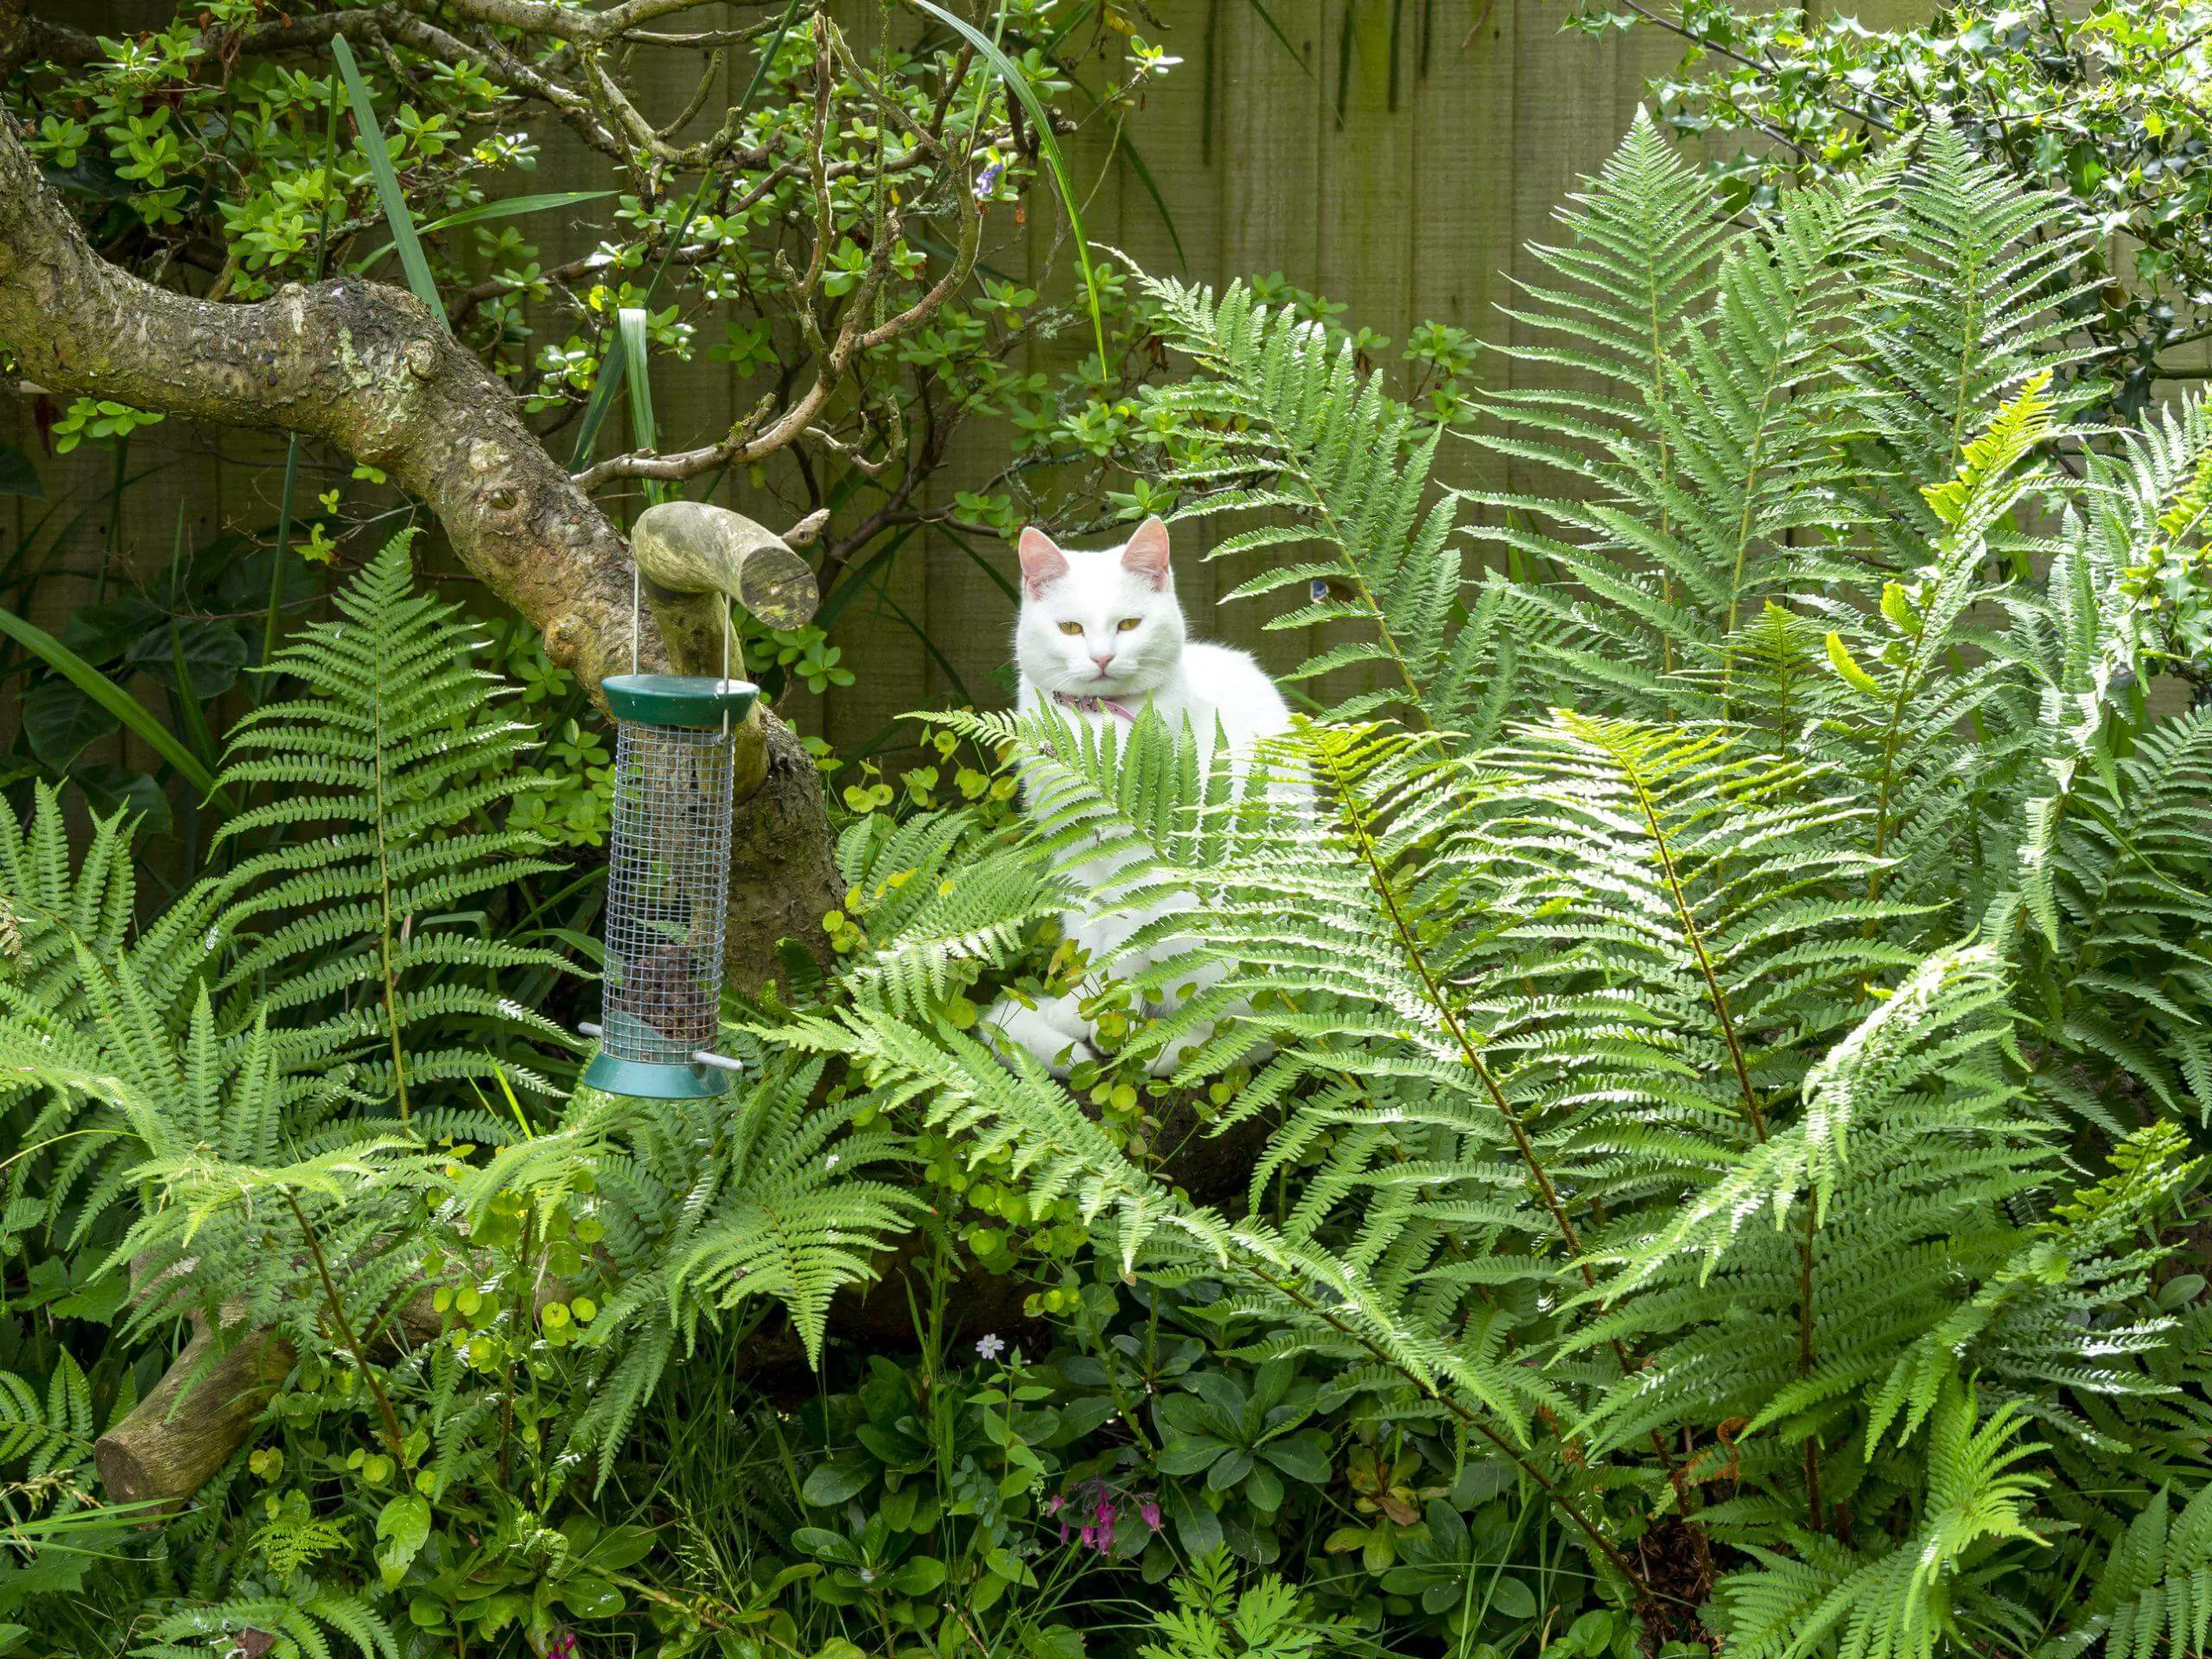 White cat hiding amongst large ferns in a garden watching a bird feeder on a tree branch